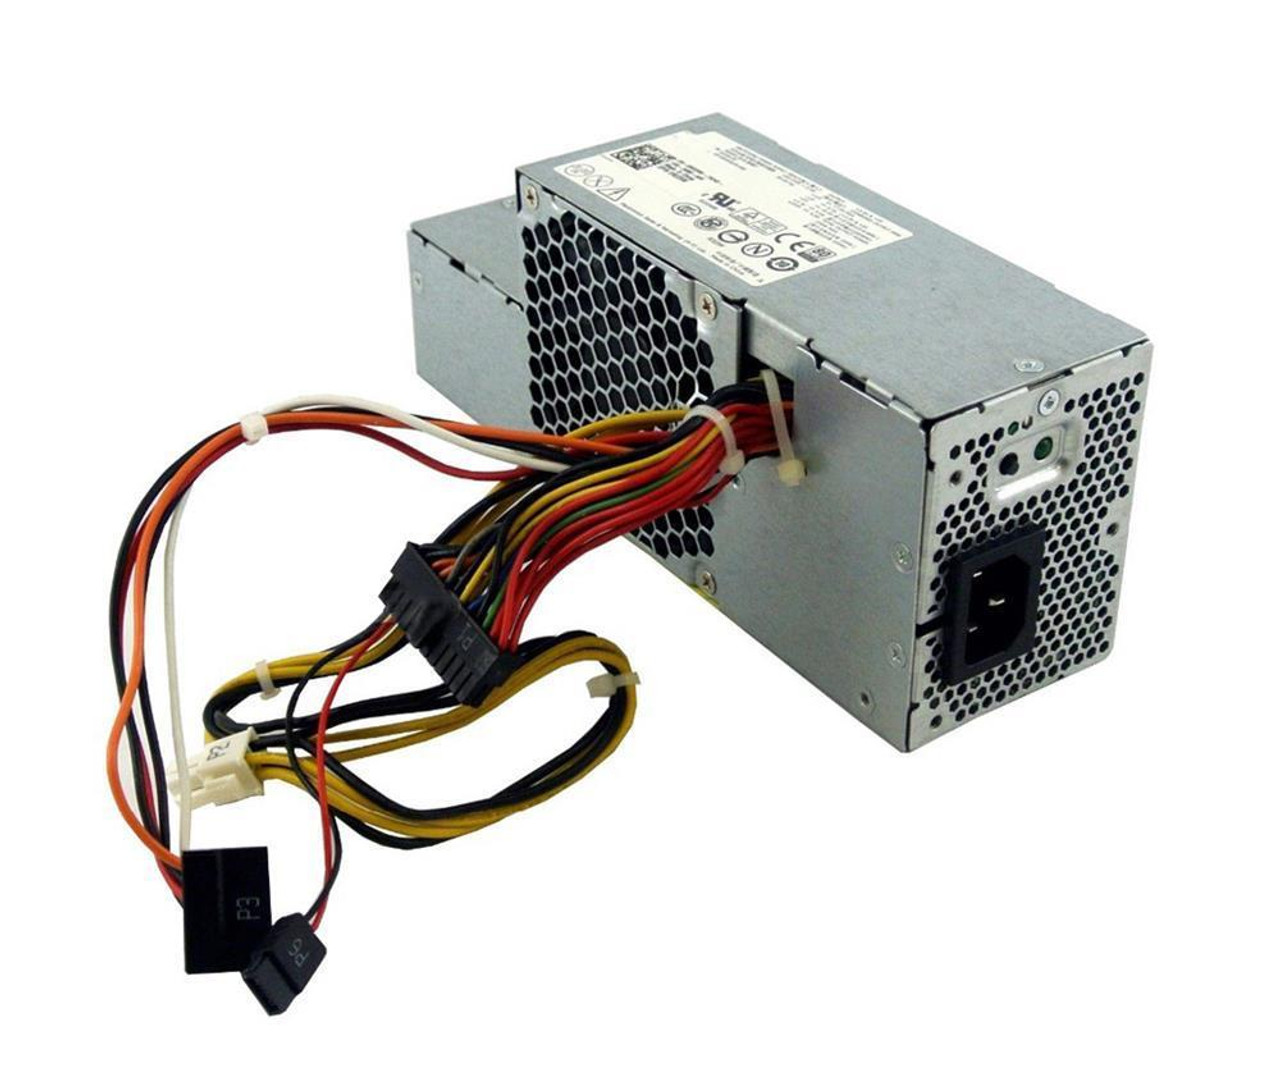 H225T Dell 235-Watts Power Supply for OptiPlex 980